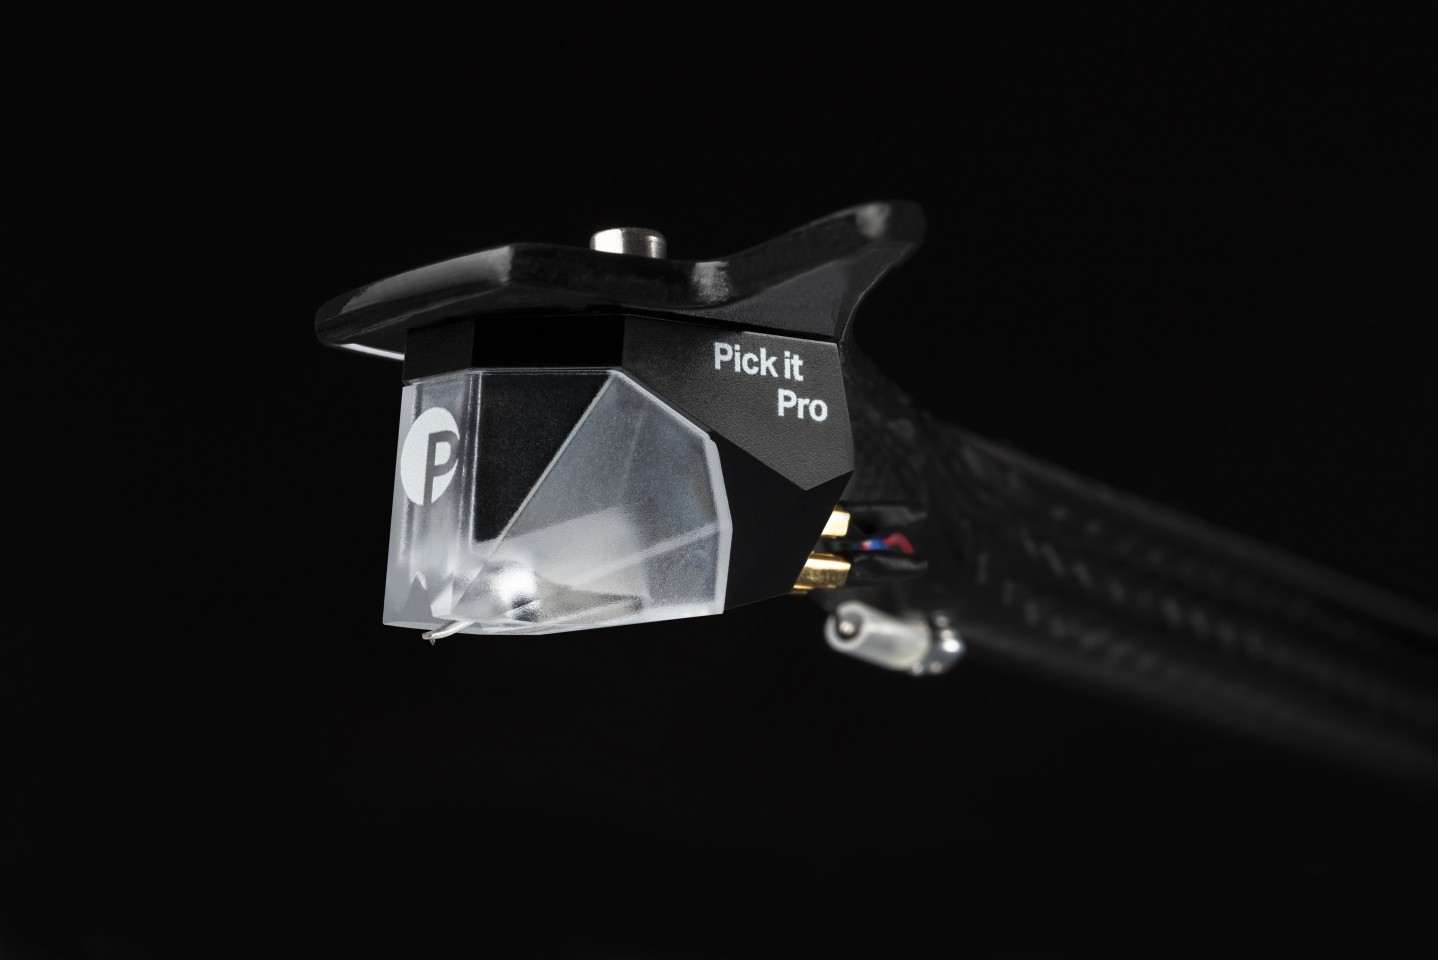 The Debut Pro boasts a brand-new MM phono cartridge developed with Ortofon